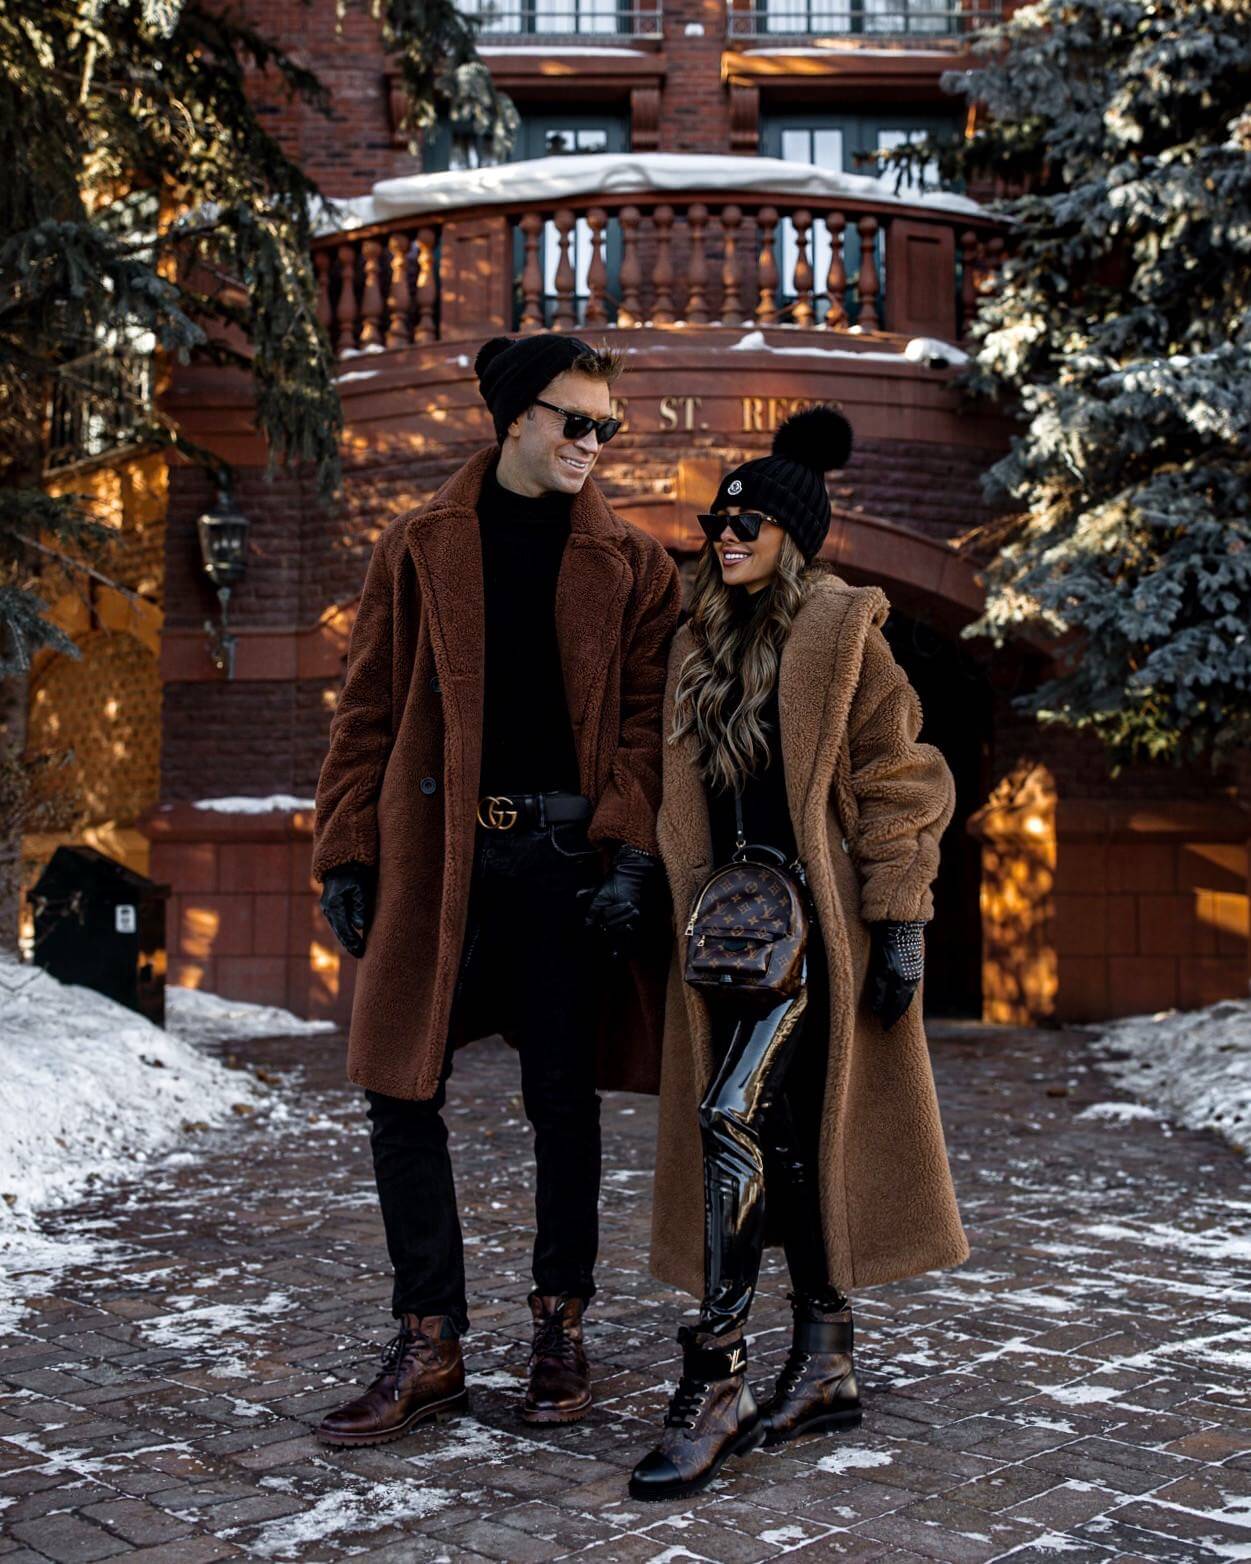 https://www.miamiamine.com/wp-content/uploads/2020/01/His-and-hers-winter-outfits-aspen.jpeg